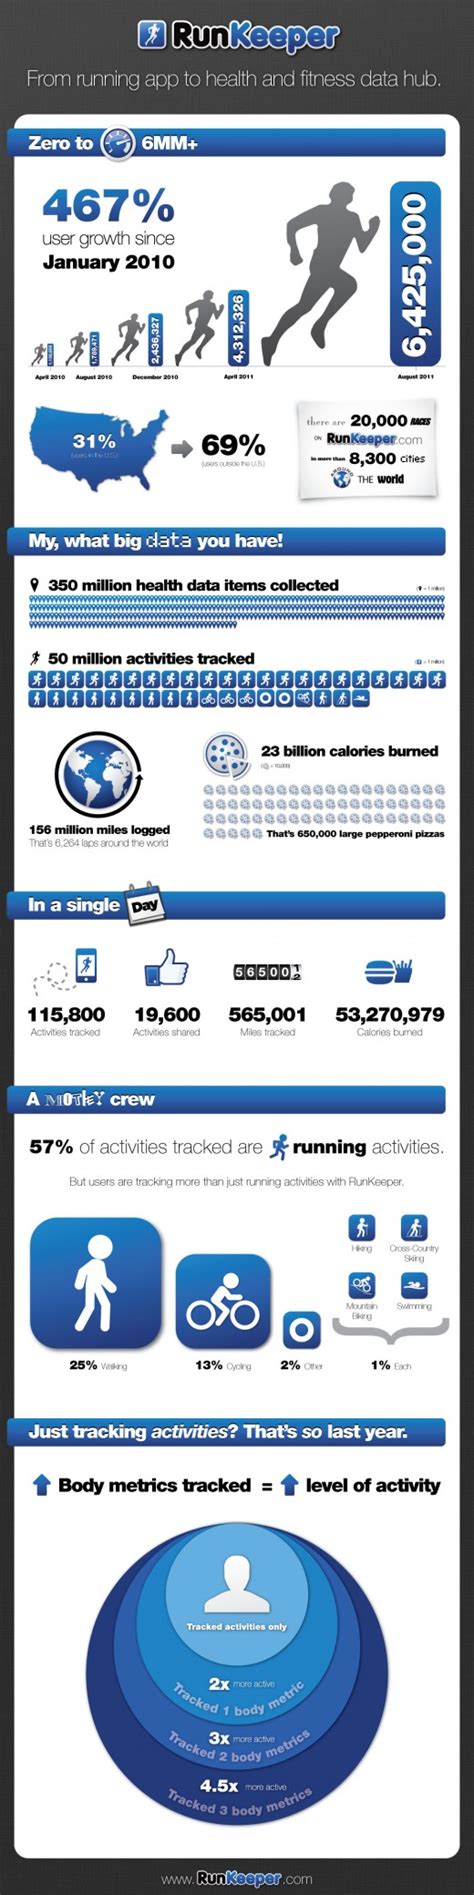 Check various health records on the samsung. 23 billion calories burned on RunKeeper, and other fun ...